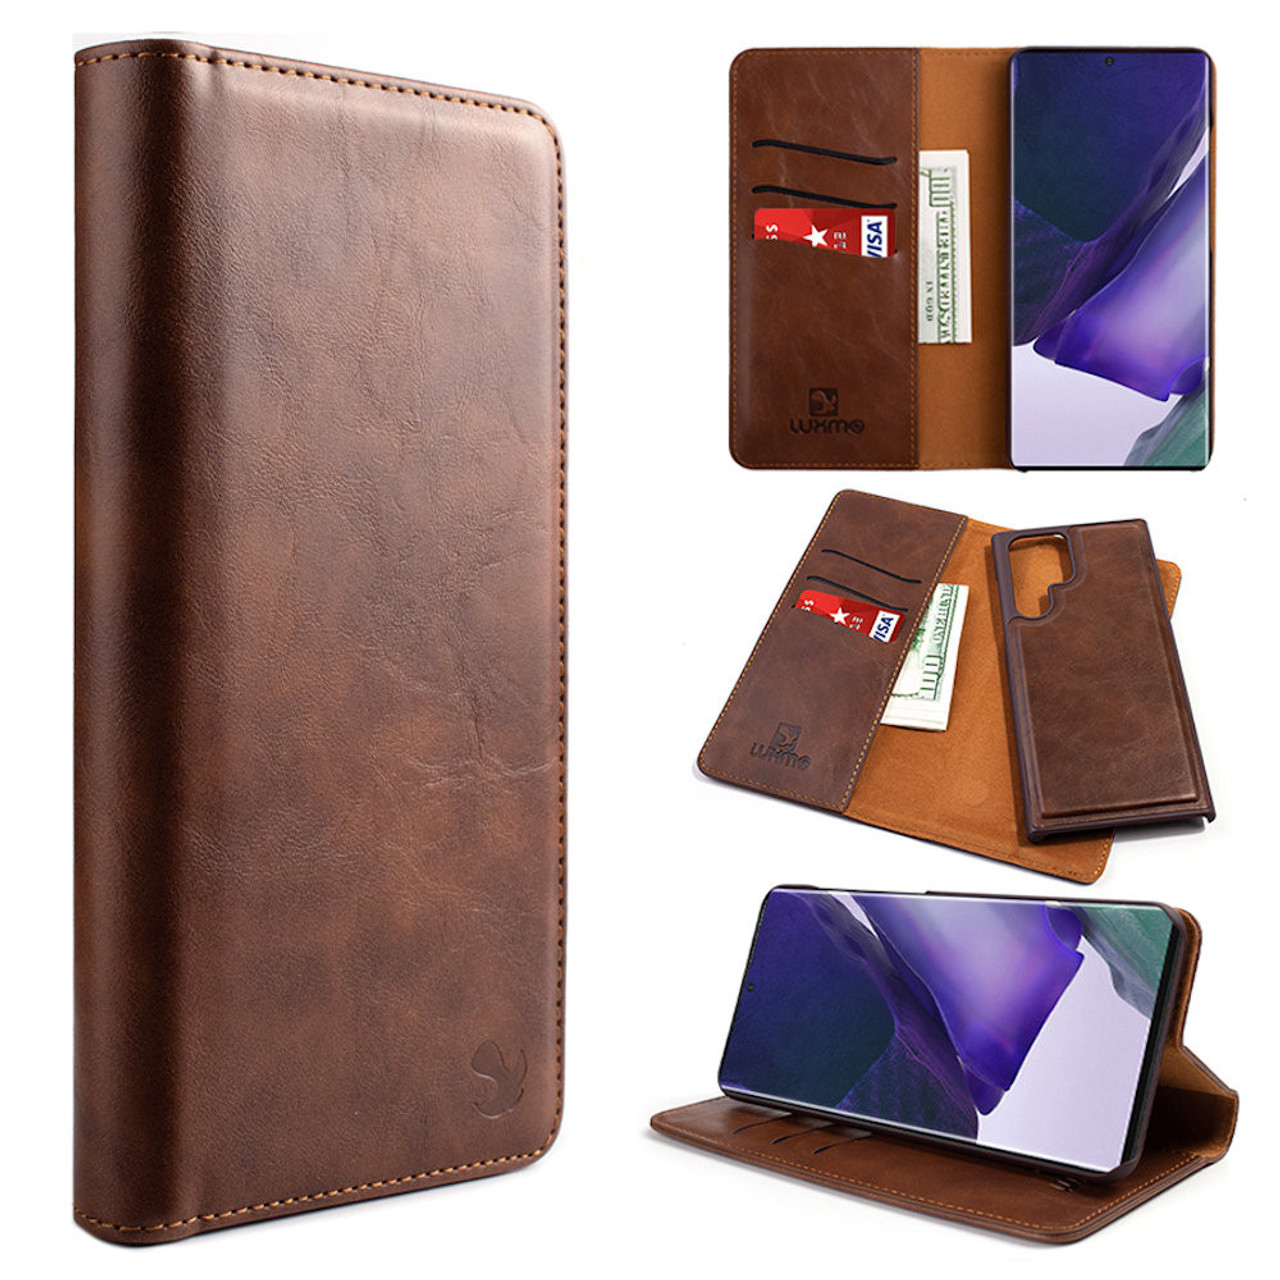 BookBook vol. 2 for iPhone  Leather wallet case with removable shell